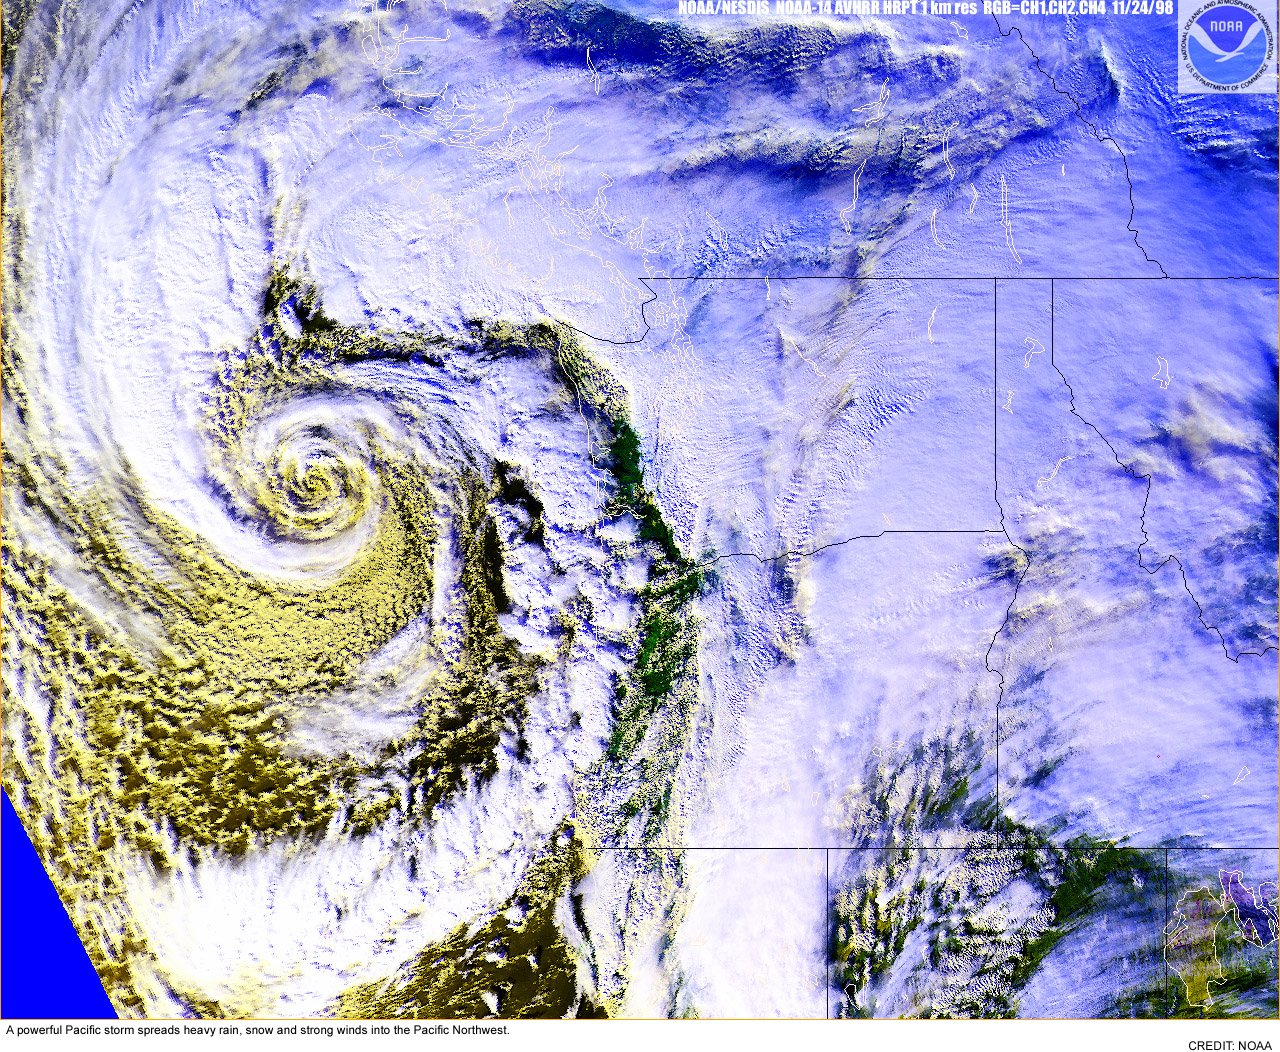 A powerful Pacific storm spreading rain, snow and heavy winds into the PacificNorthwest